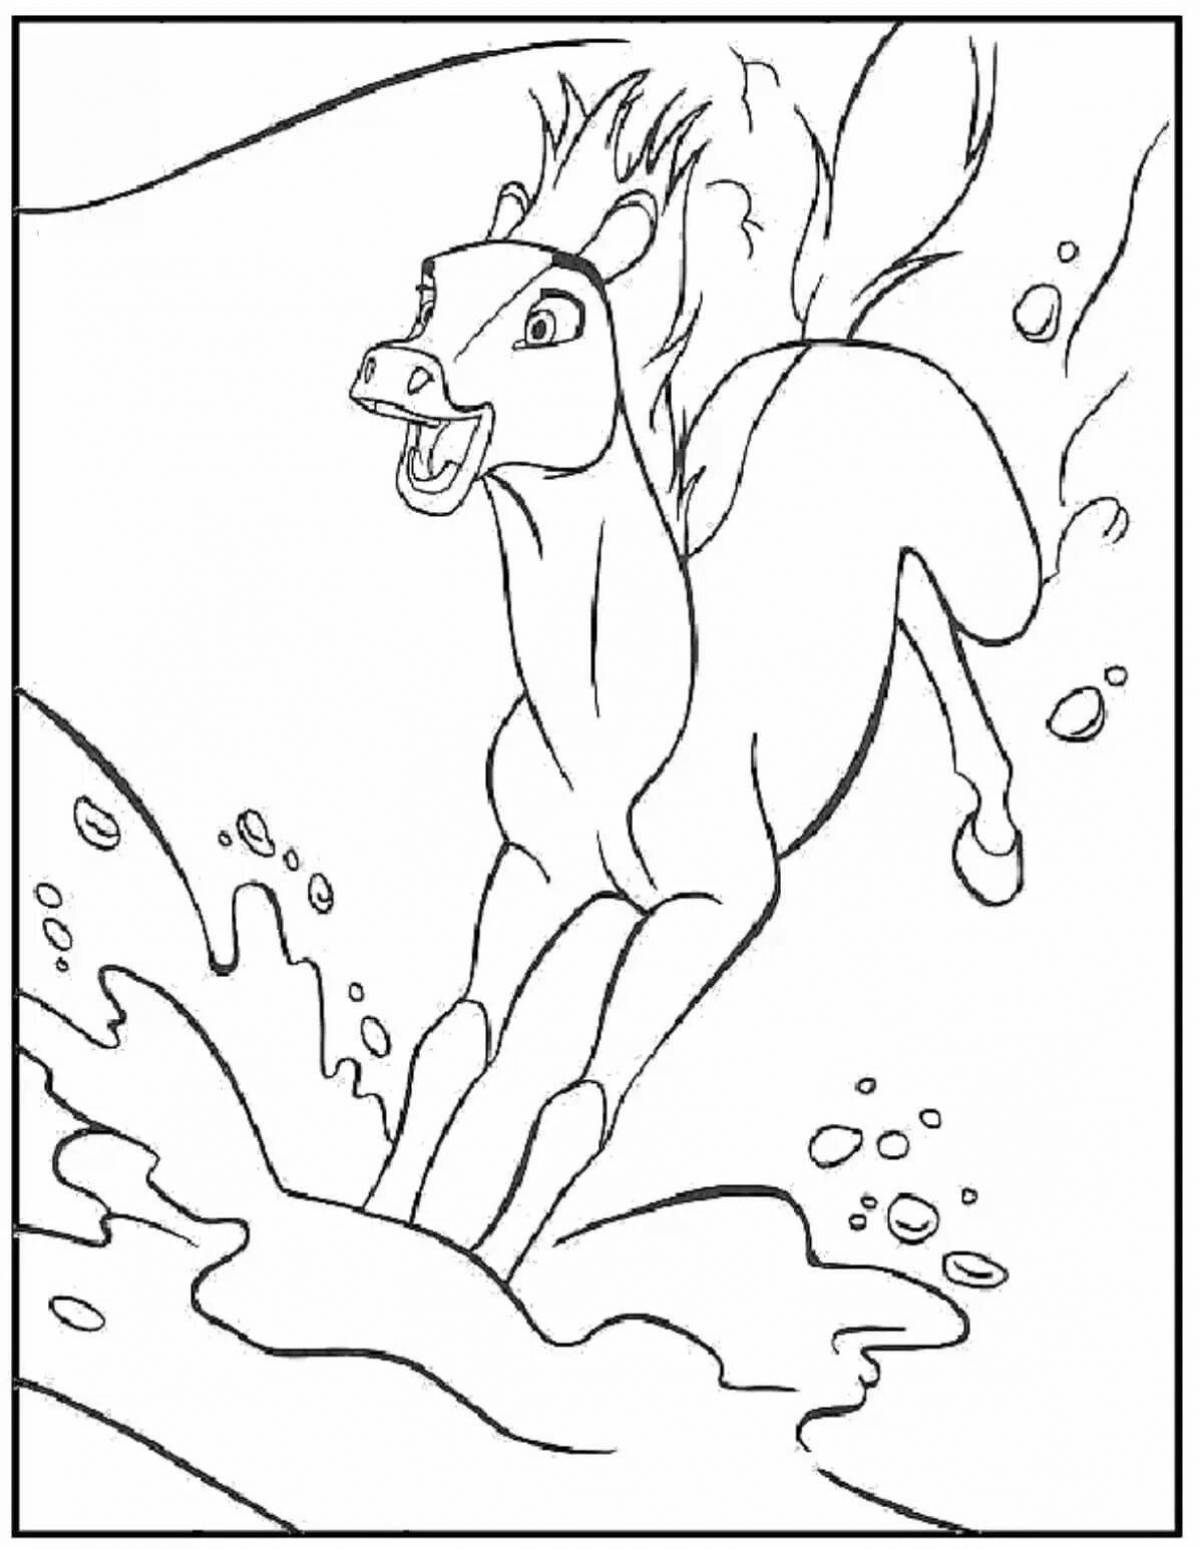 Radiant coloring page spirit horse